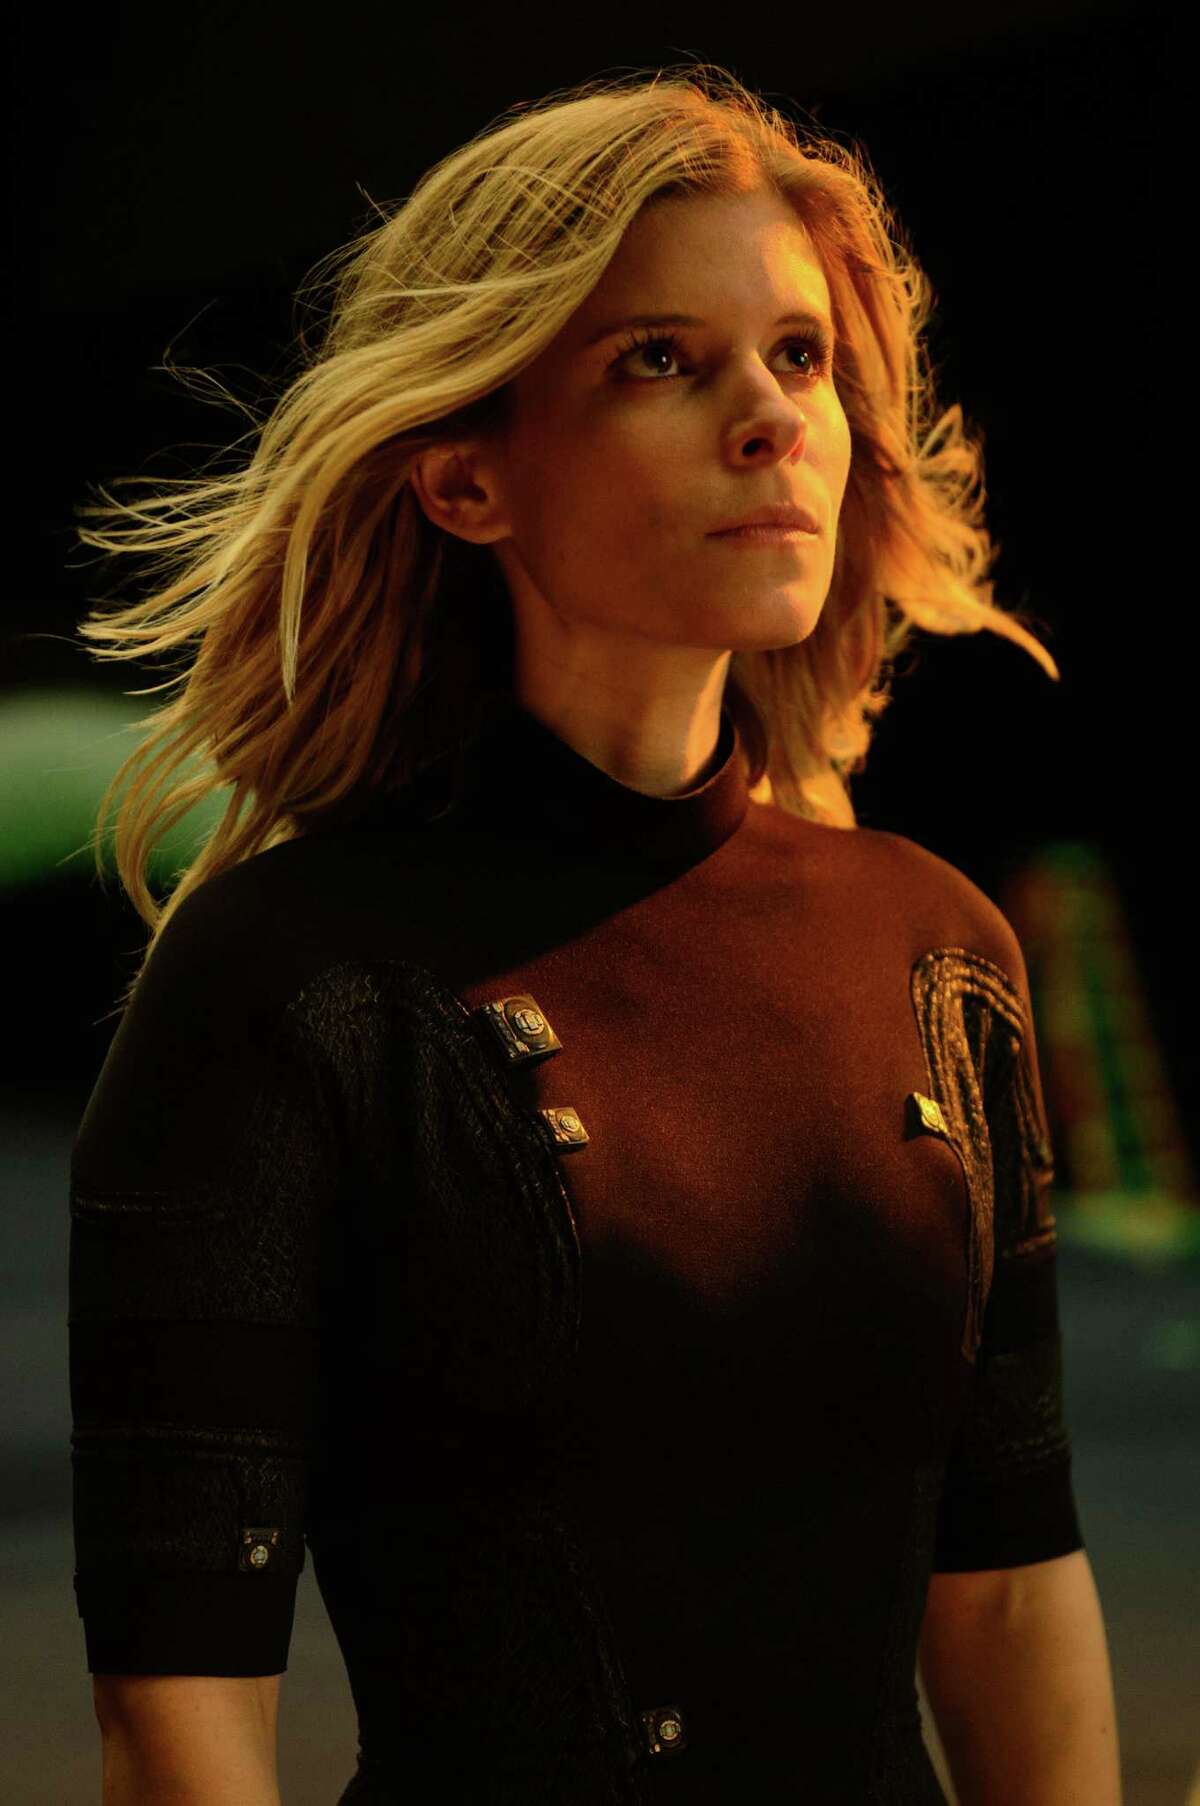 This photo provided by Twentieth Century Fox shows, Kate Mara, as Sue Storm, in a scene from the film, "Fantastic Four." The movie opens in U.S. theaters on Aug. 7, 2015. (Ben Rothstein/Twentieth Century Fox via AP)